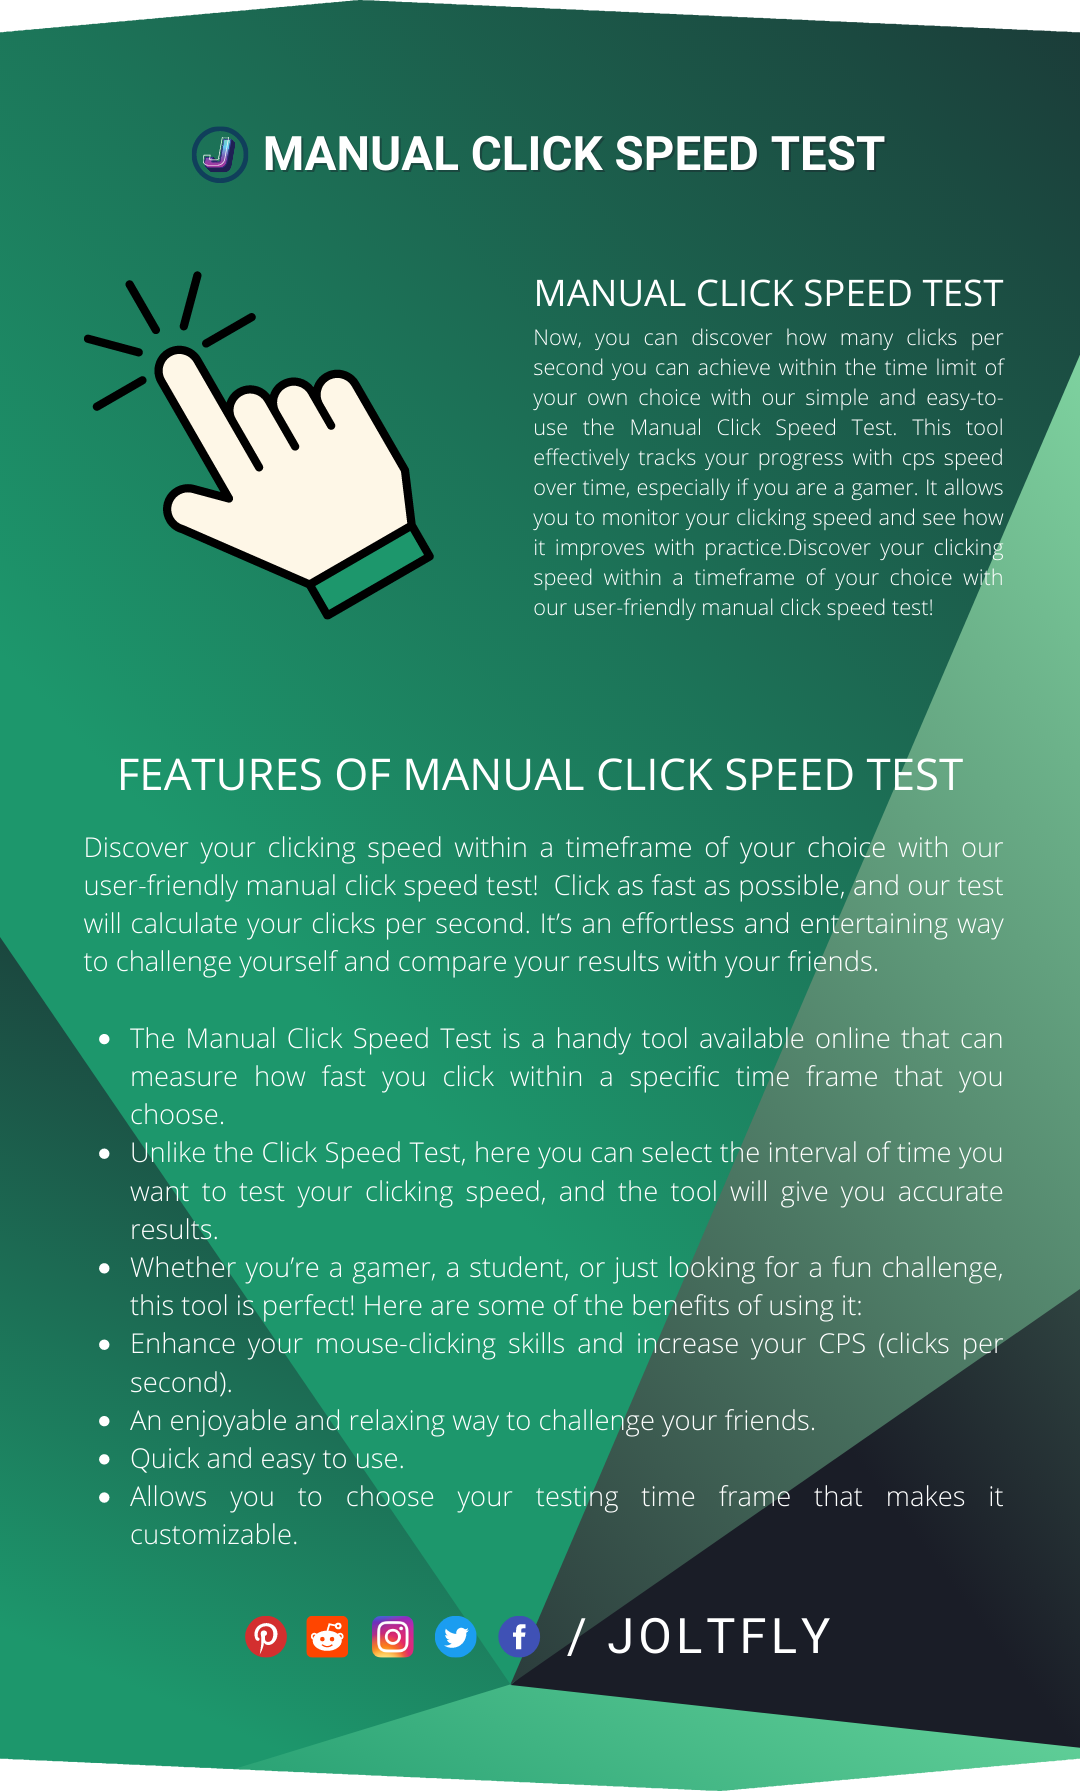 Manual Click Speed Test - Joltfly